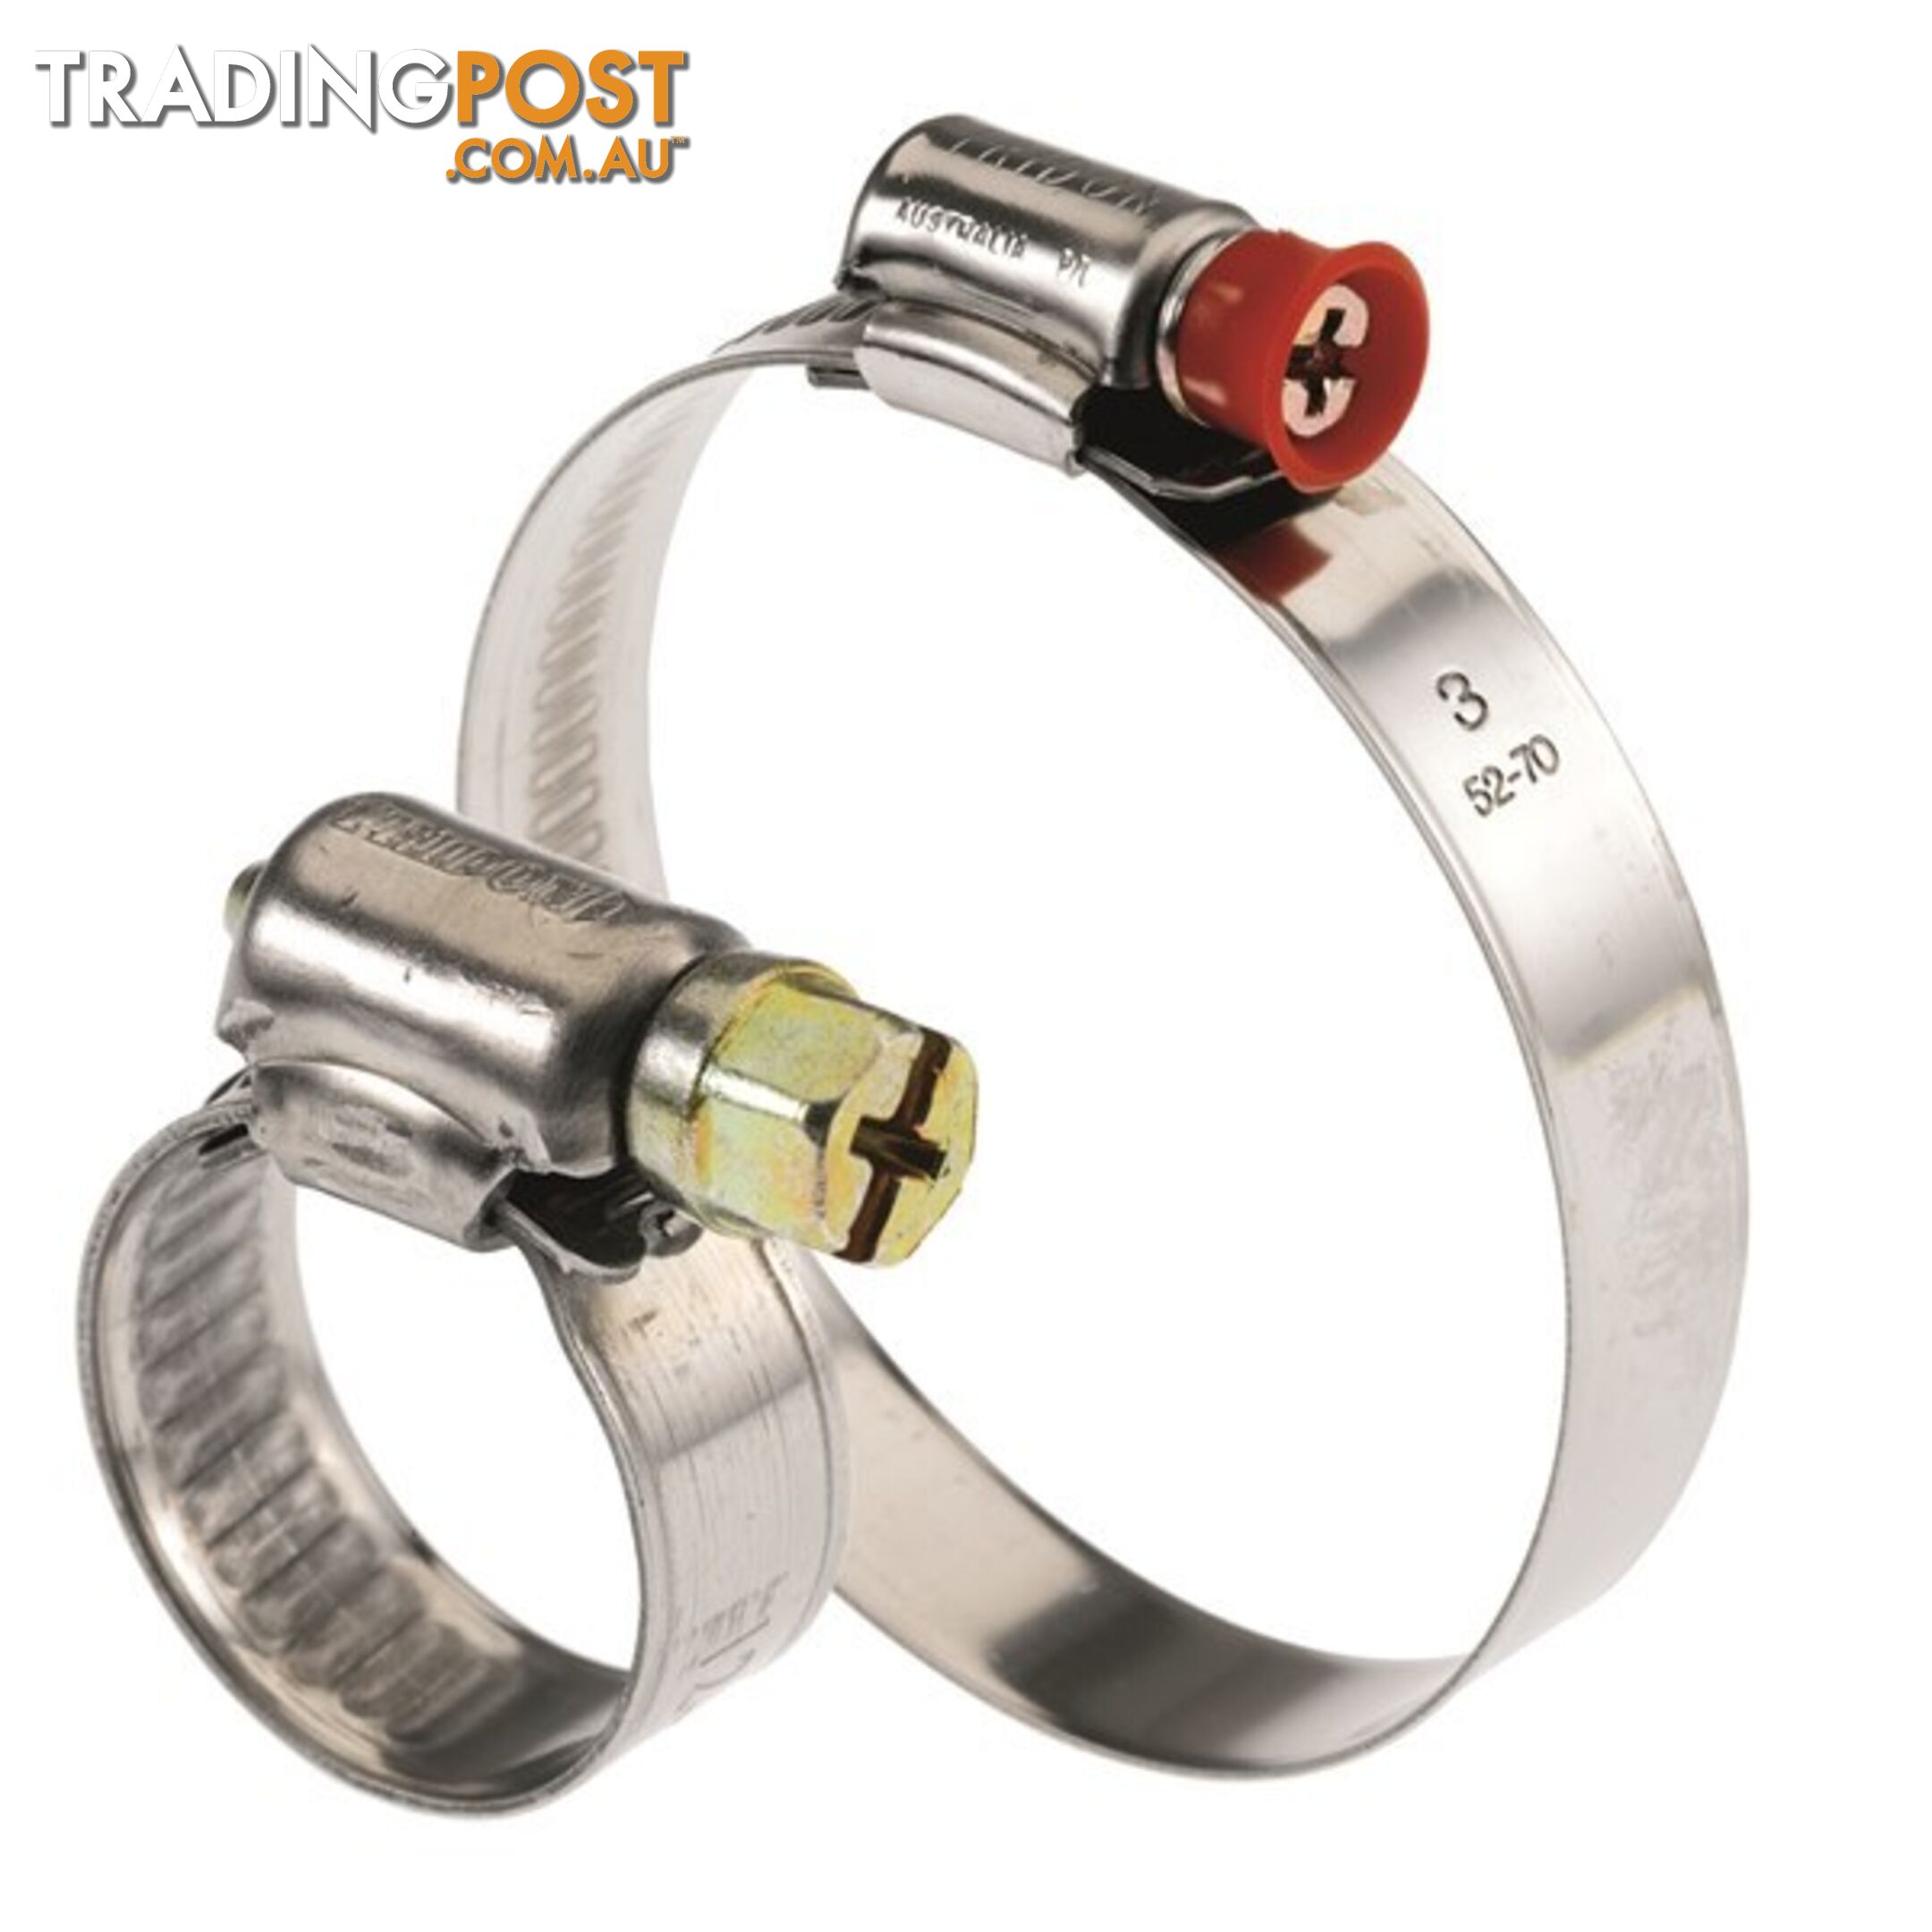 Tridon Part S.S Hose Clamp 9.5mm-12mm Multi Purpose Solid Micro Band 10pk SKU - MP000P